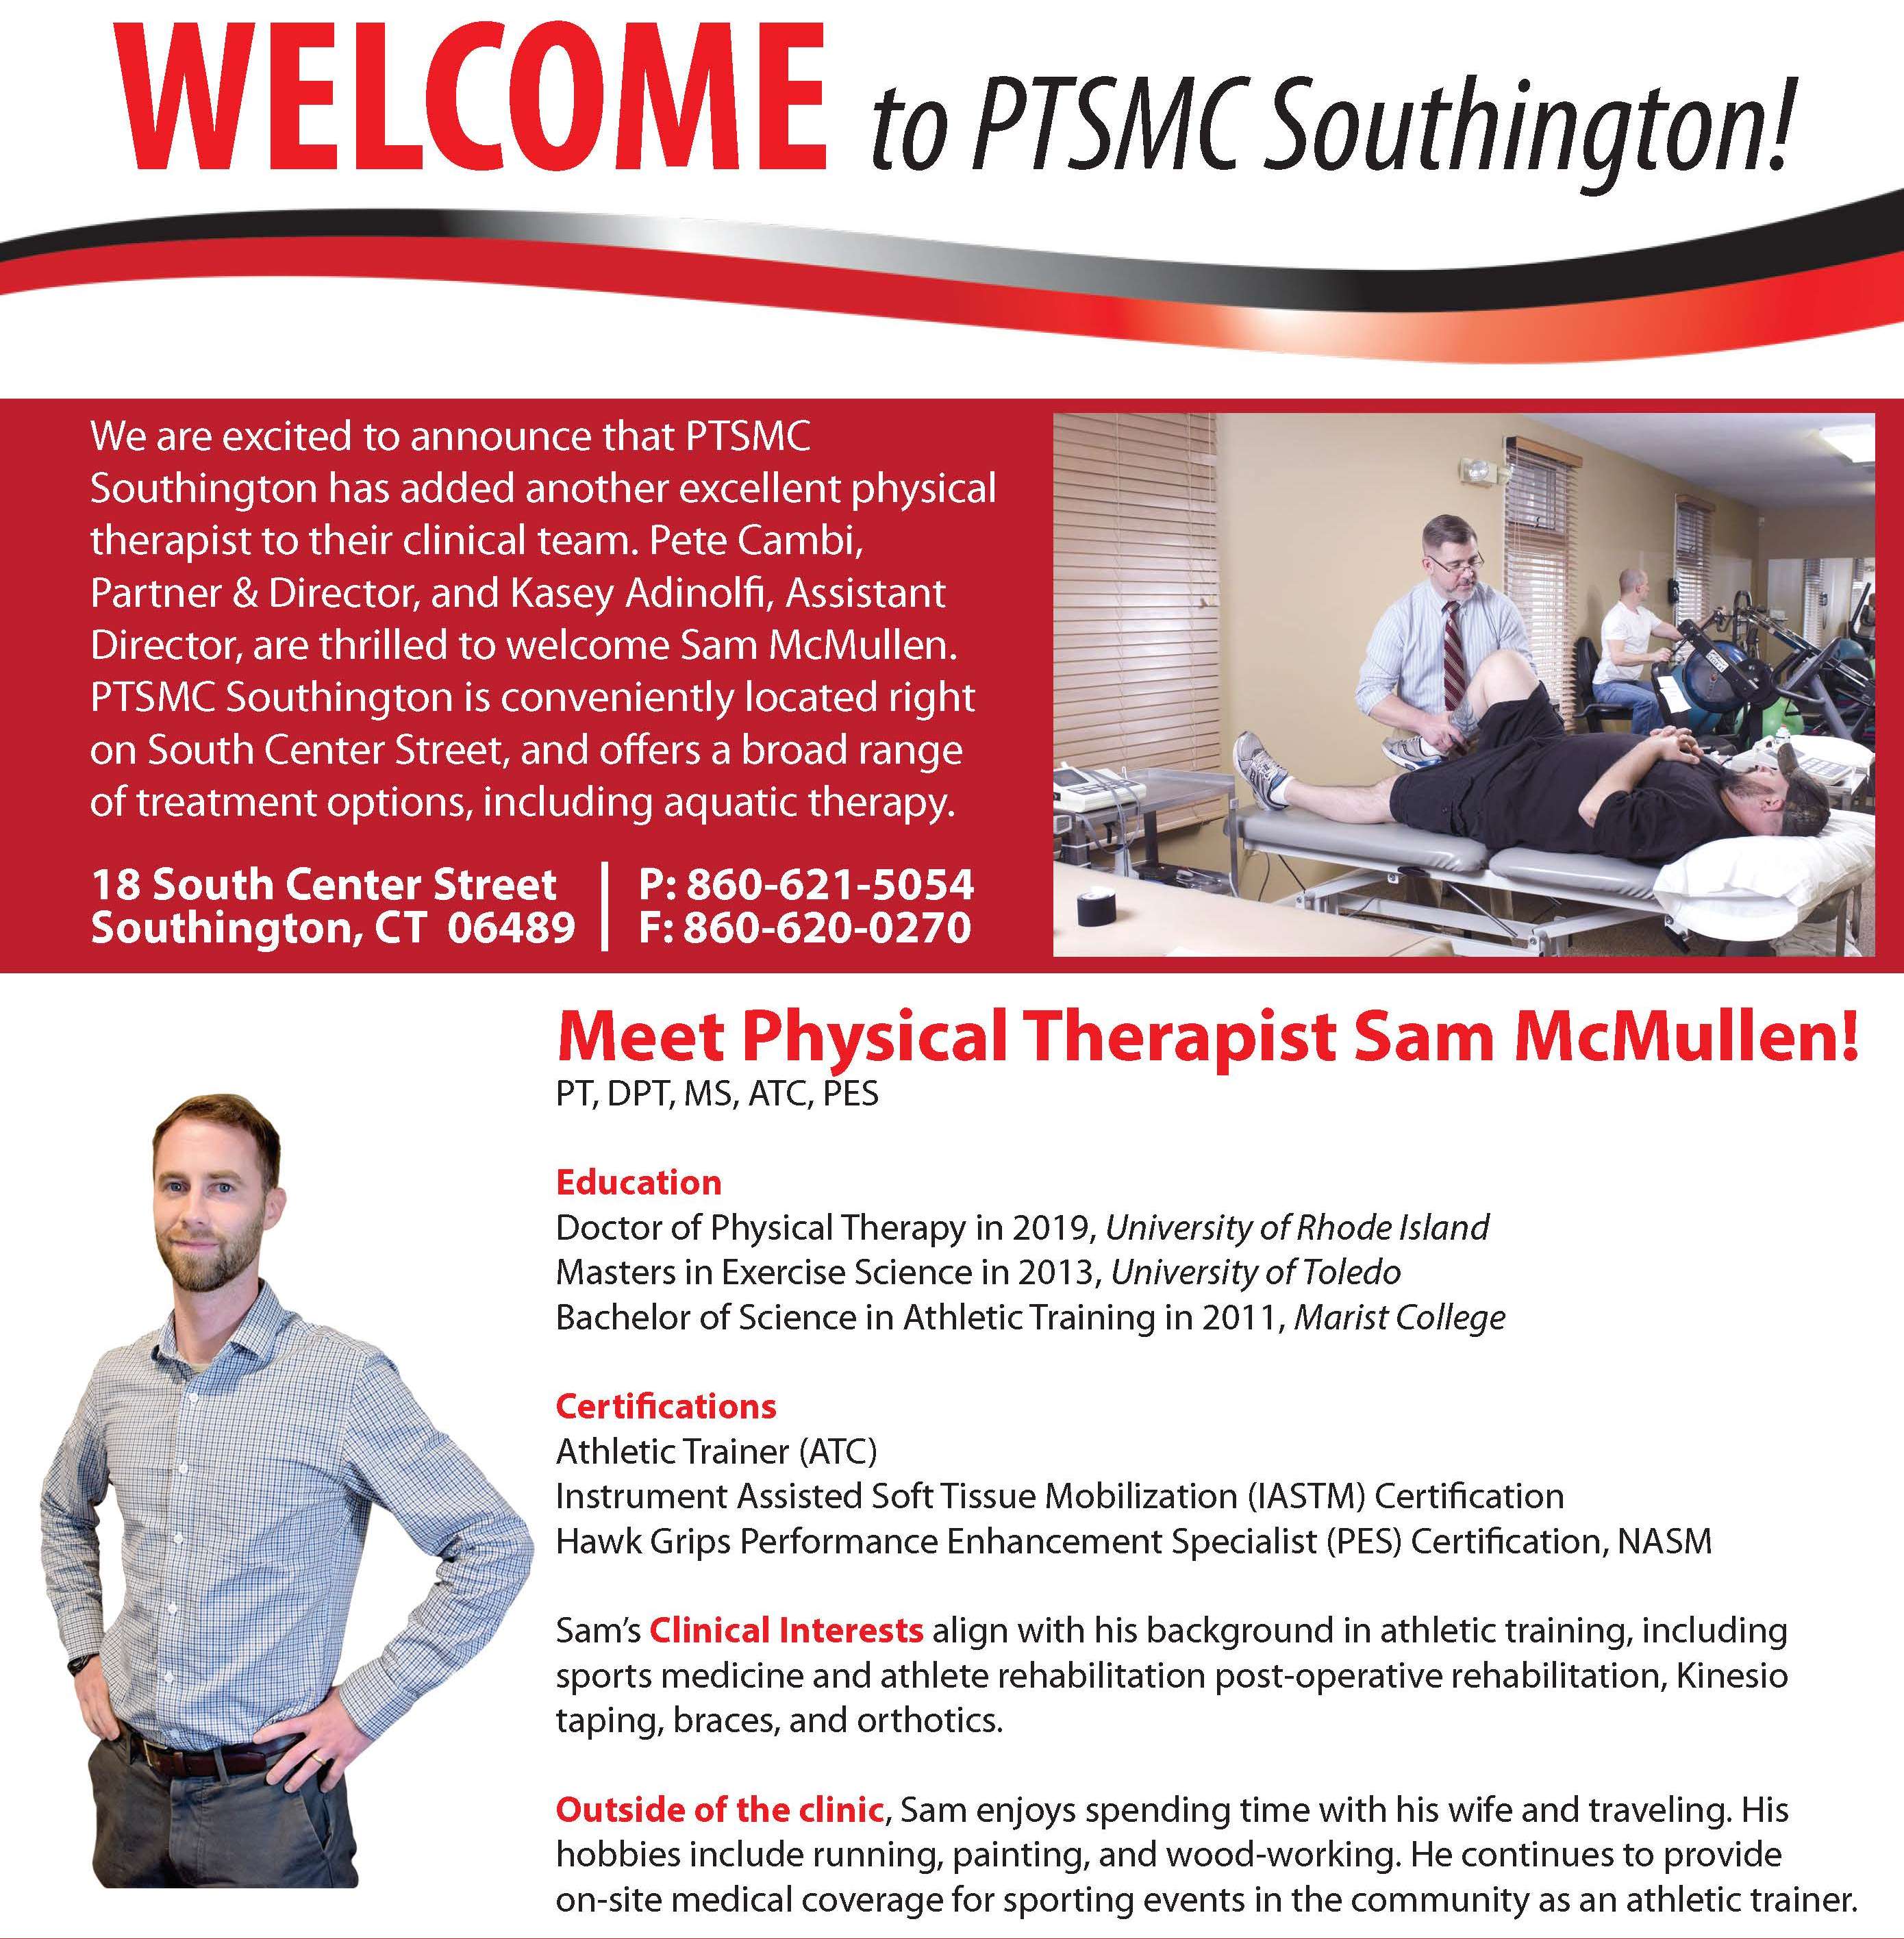 Sam McMullen Physical Therapist Information